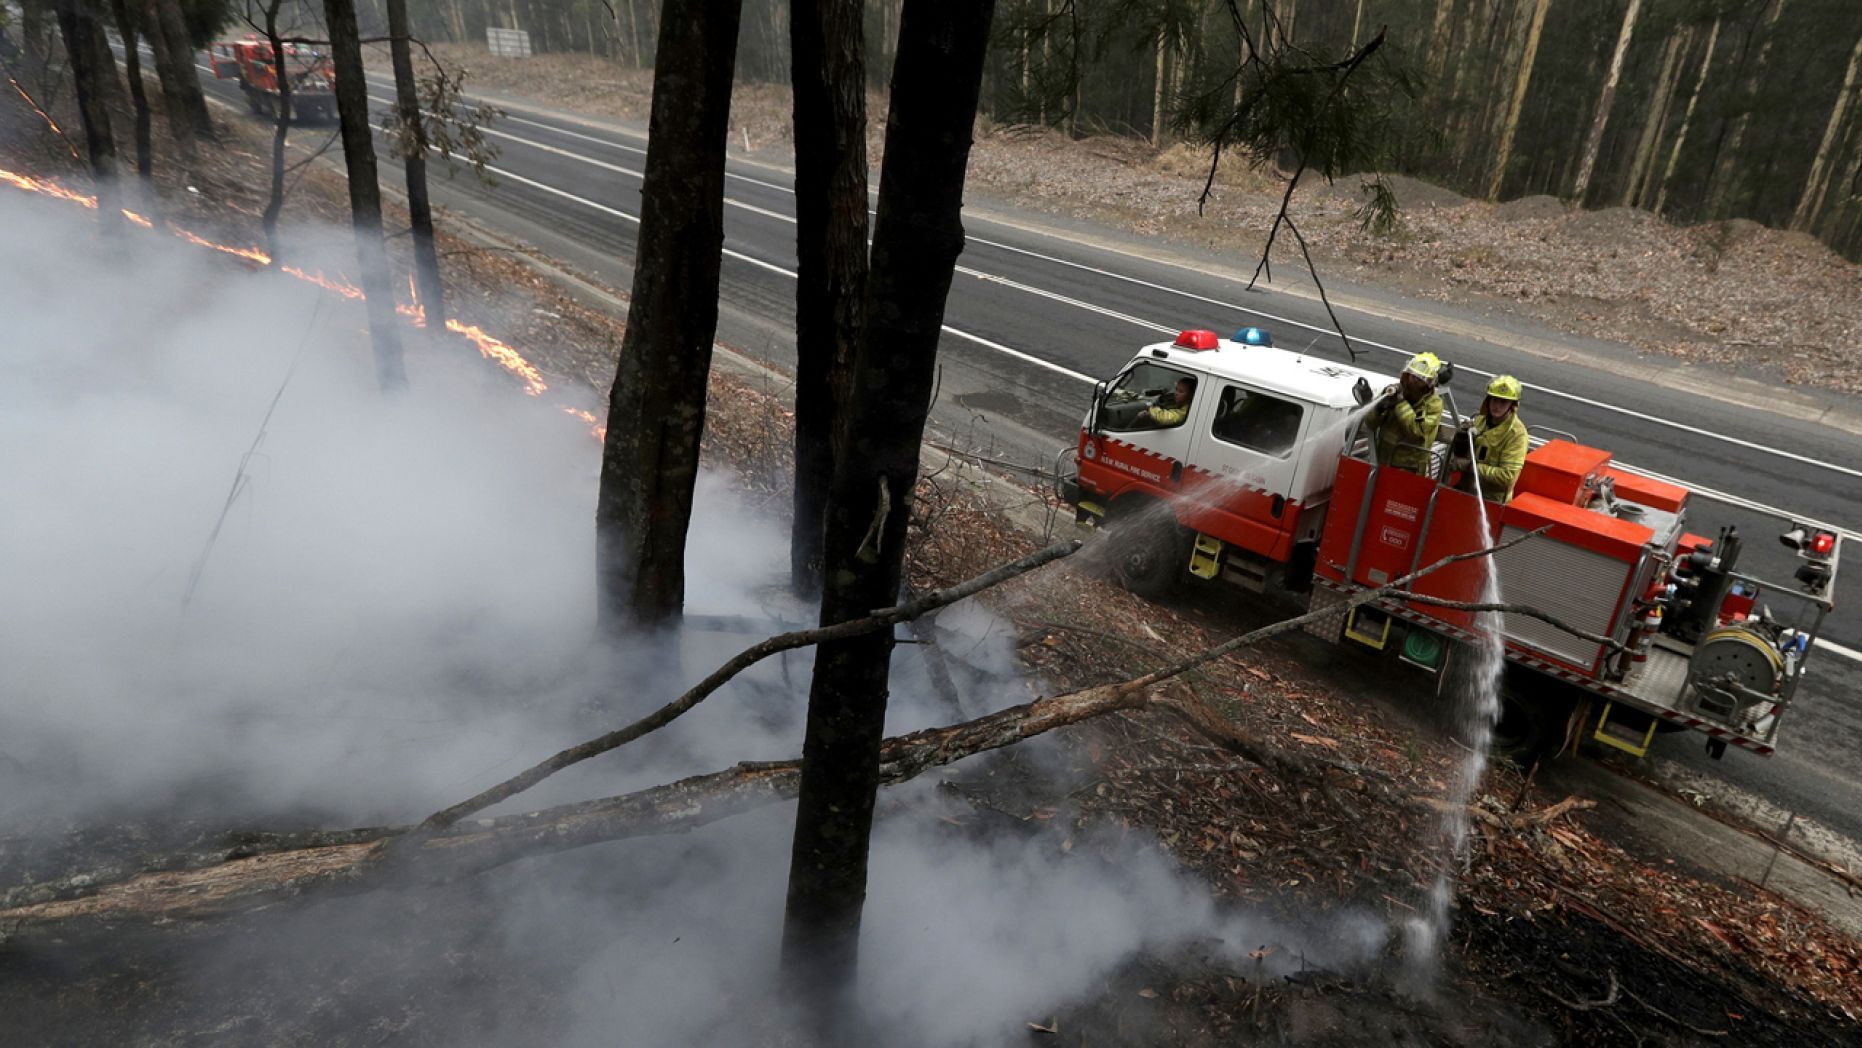 Firefighters manage a controlled burn to help contain a larger fire near Falls Creek, Australia, Sunday, Jan. 5, 2020. 